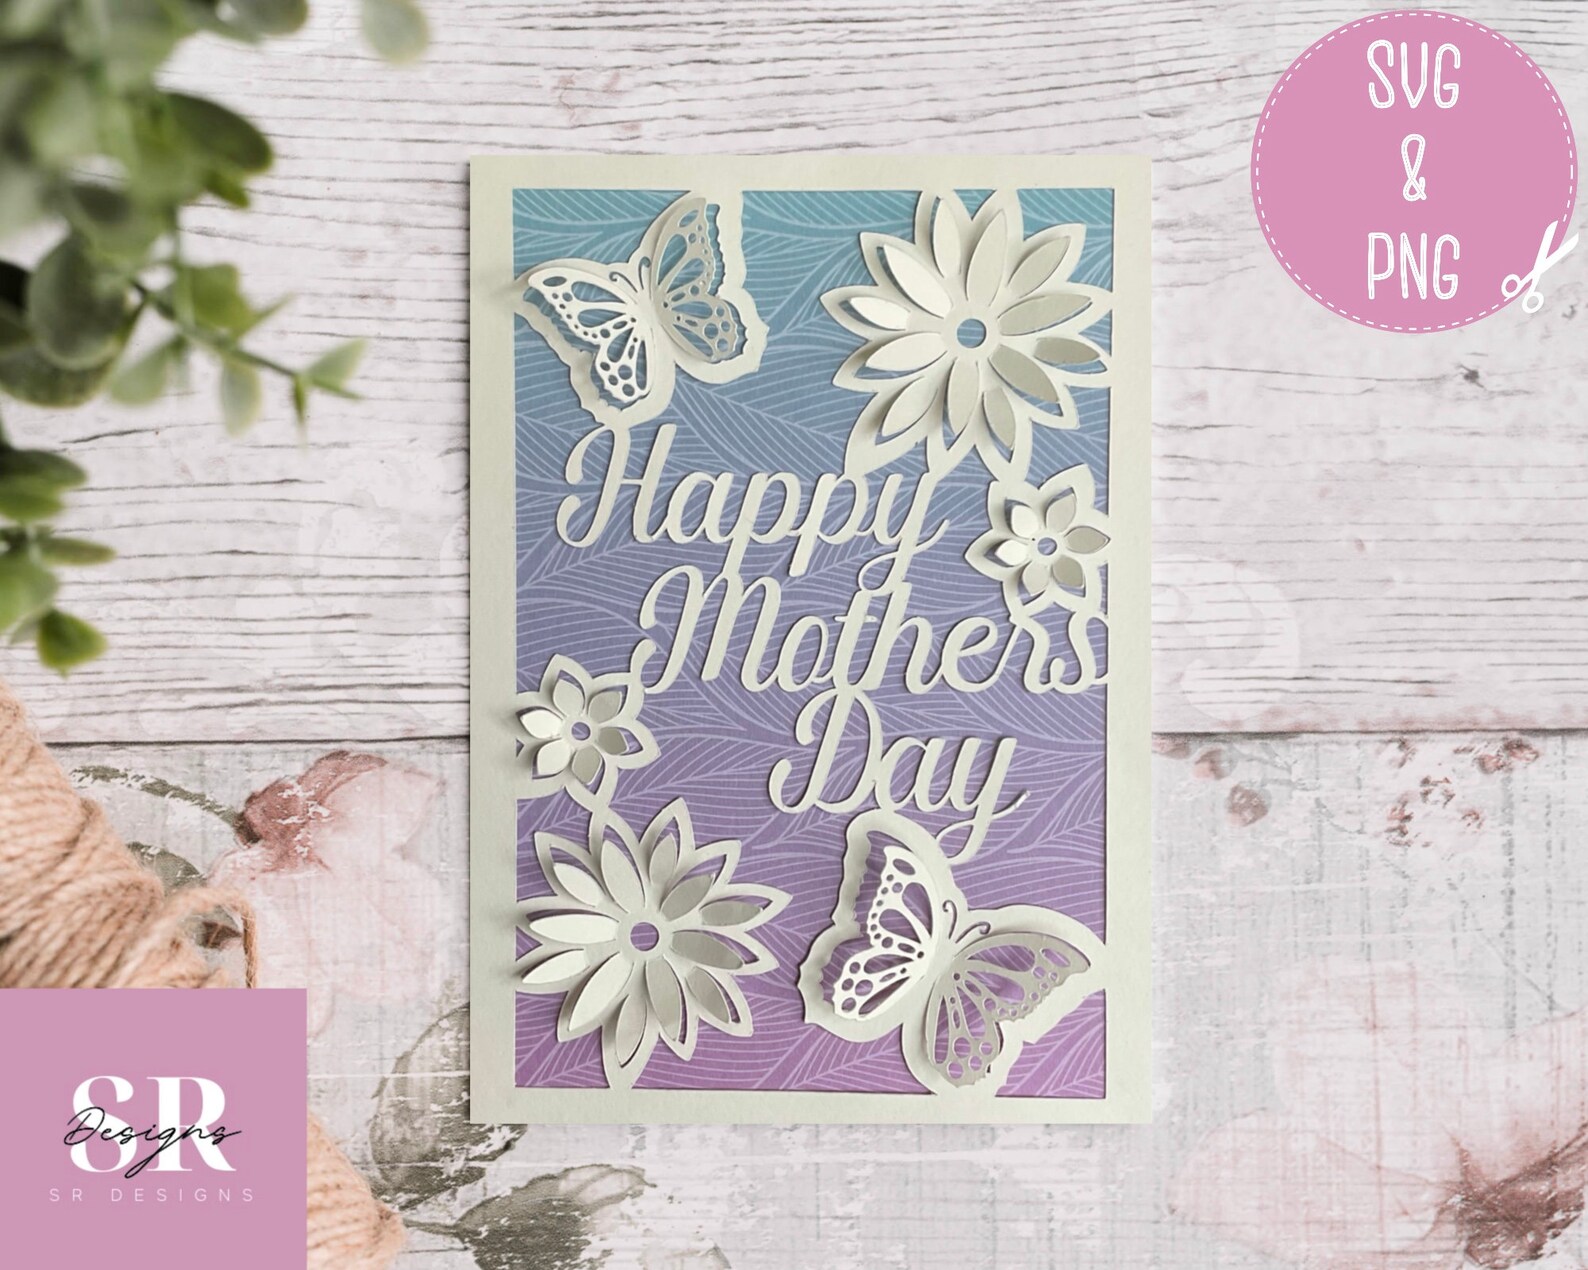 SVG: 3D Mothers Day Card Svg. Happy Mothers Day. 3D Mothers - Etsy UK